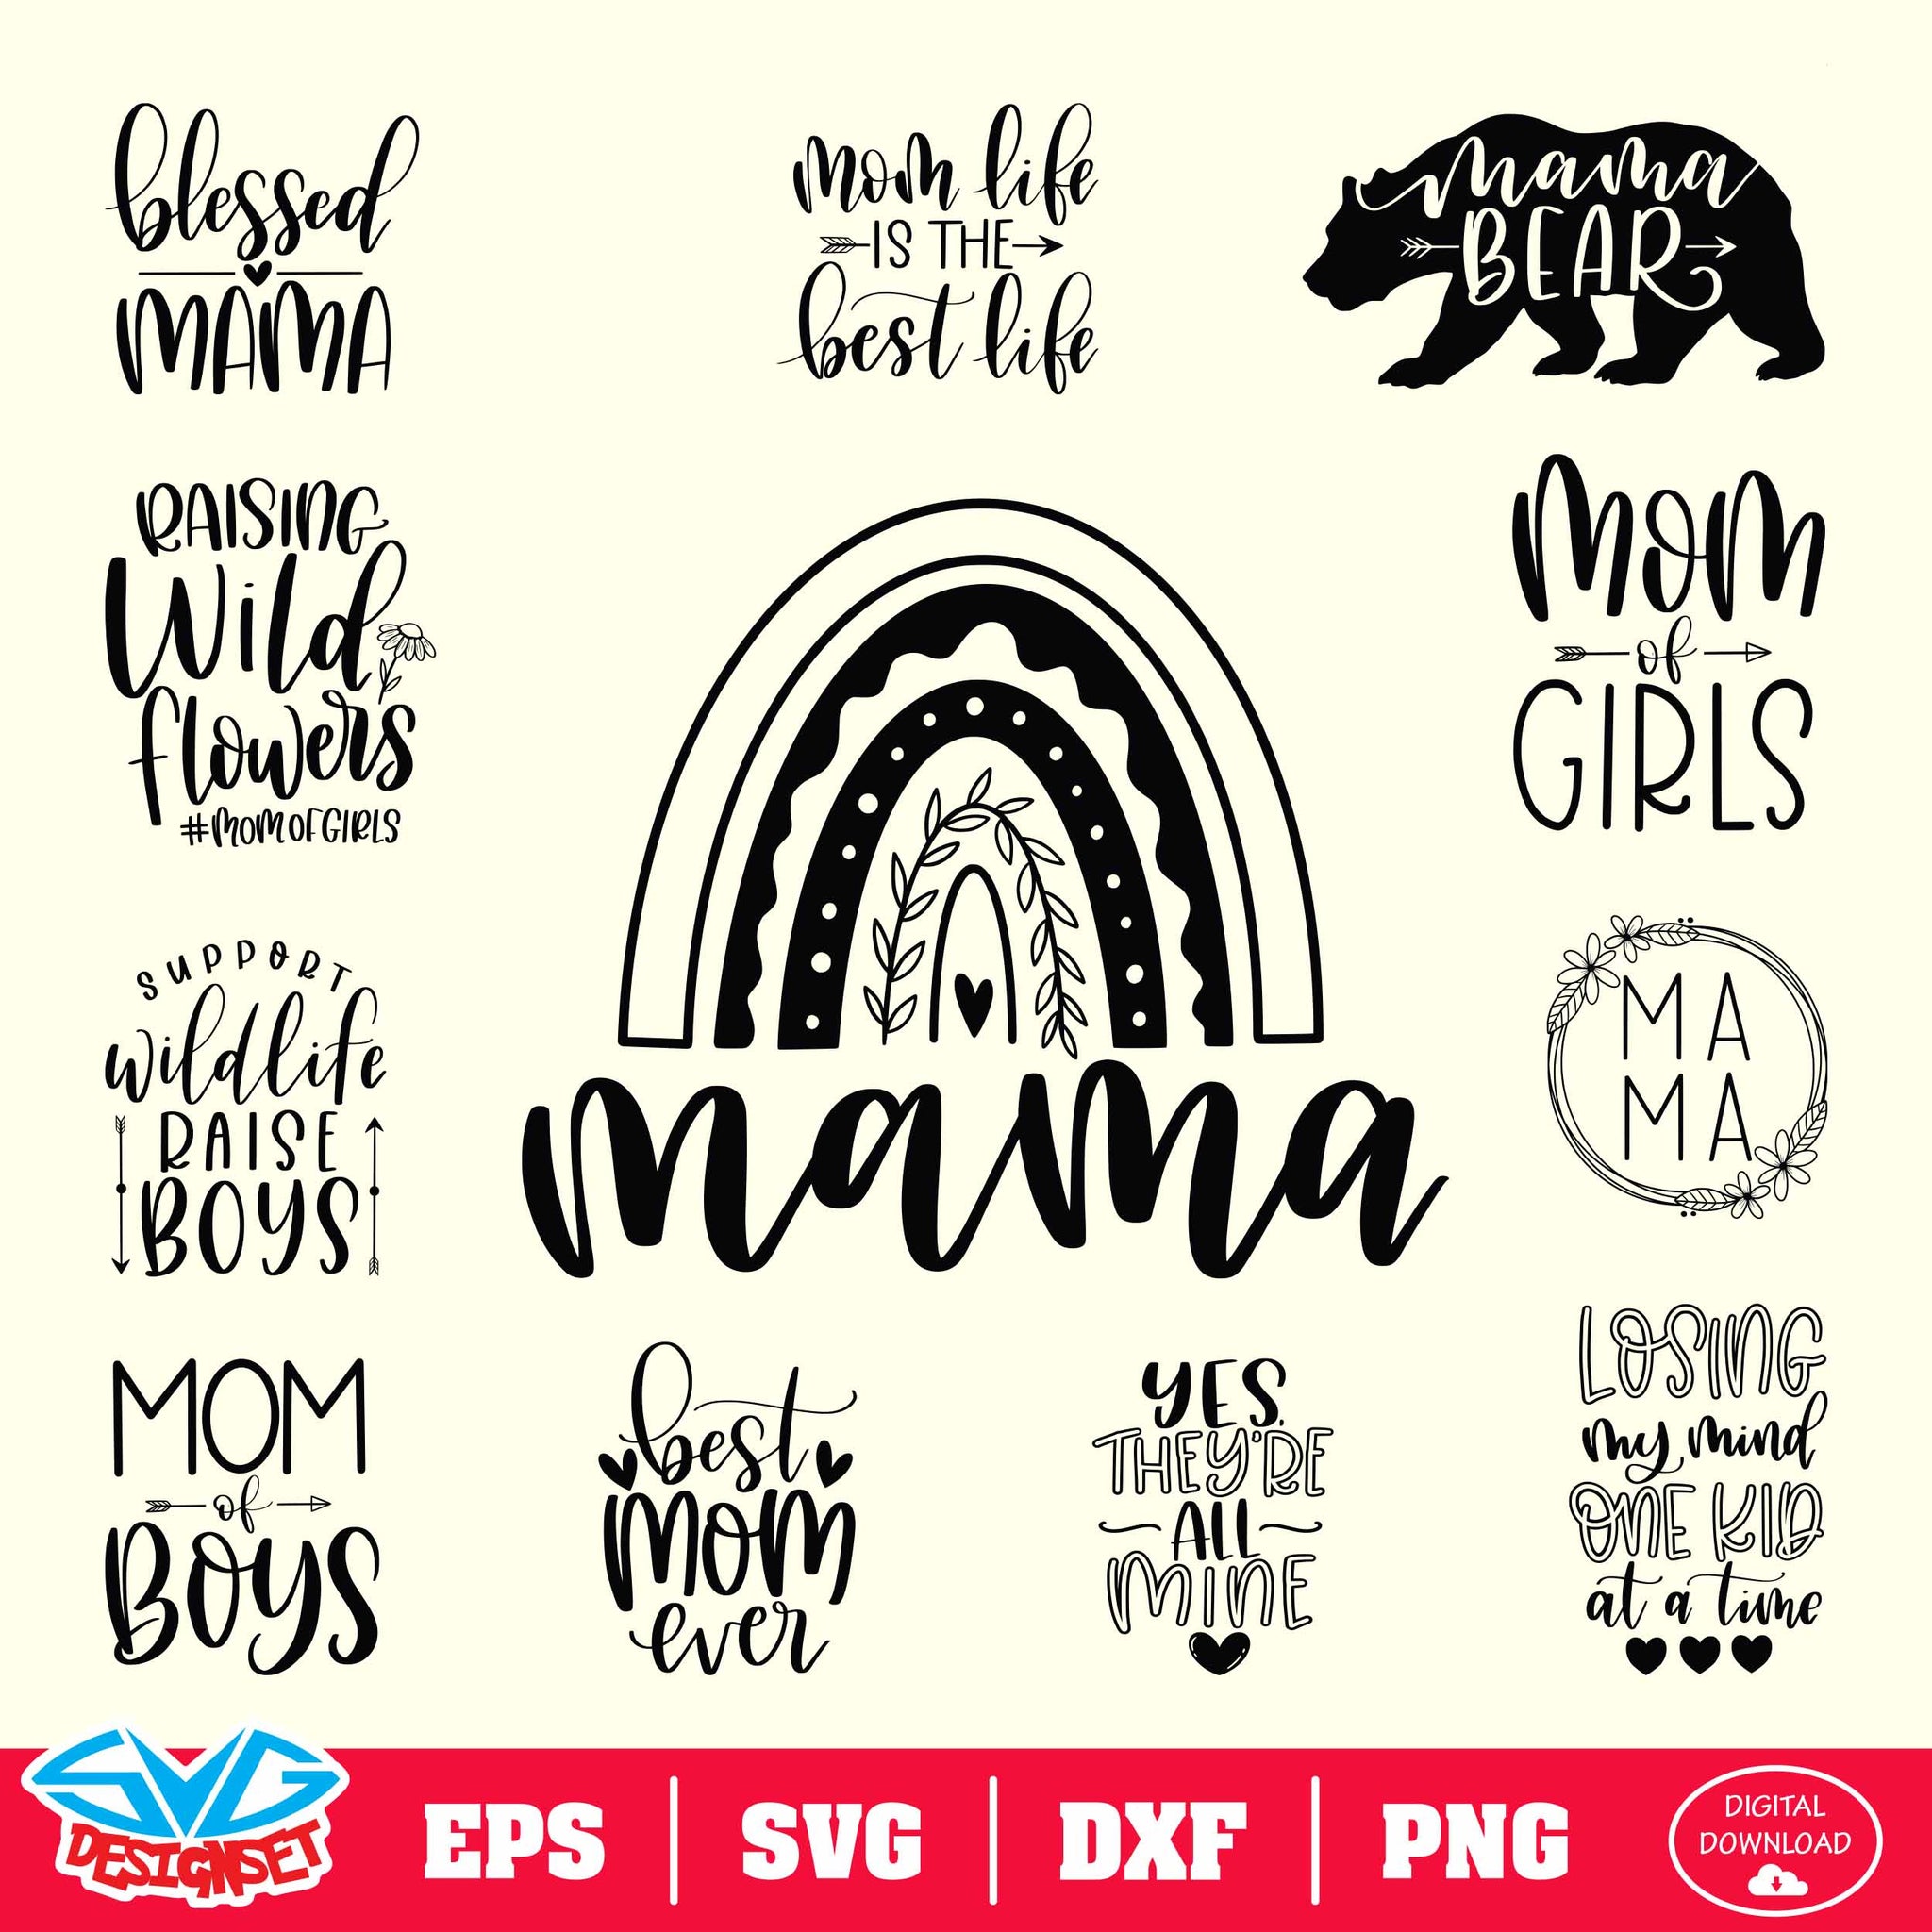 Happy Mother's Day Bundle Svg, Dxf, Eps, Png, Clipart, Silhouette and Cutfiles #6 - SVGDesignSets